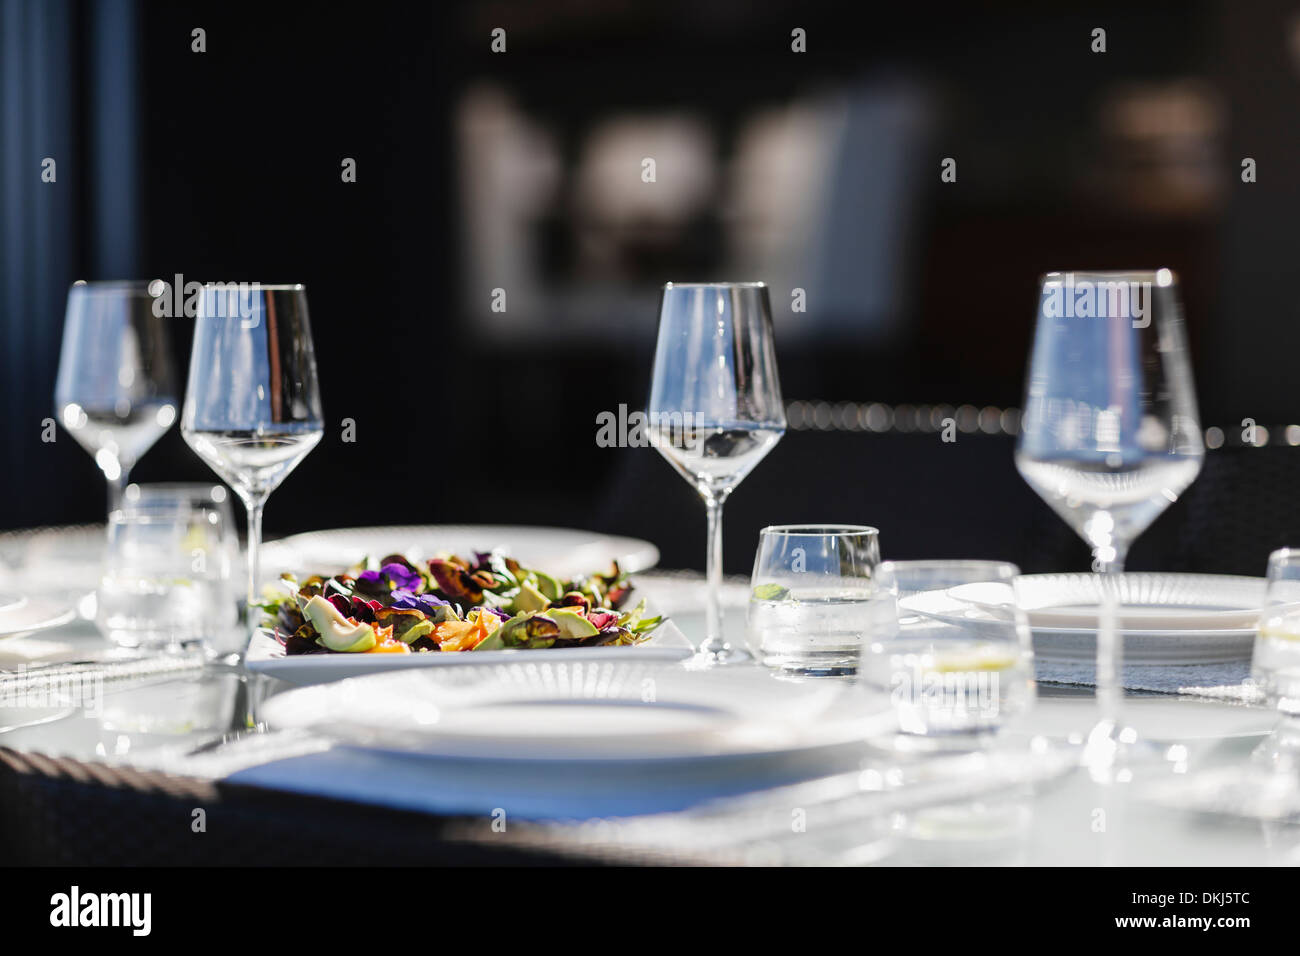 Place settings on elegant dining table Stock Photo